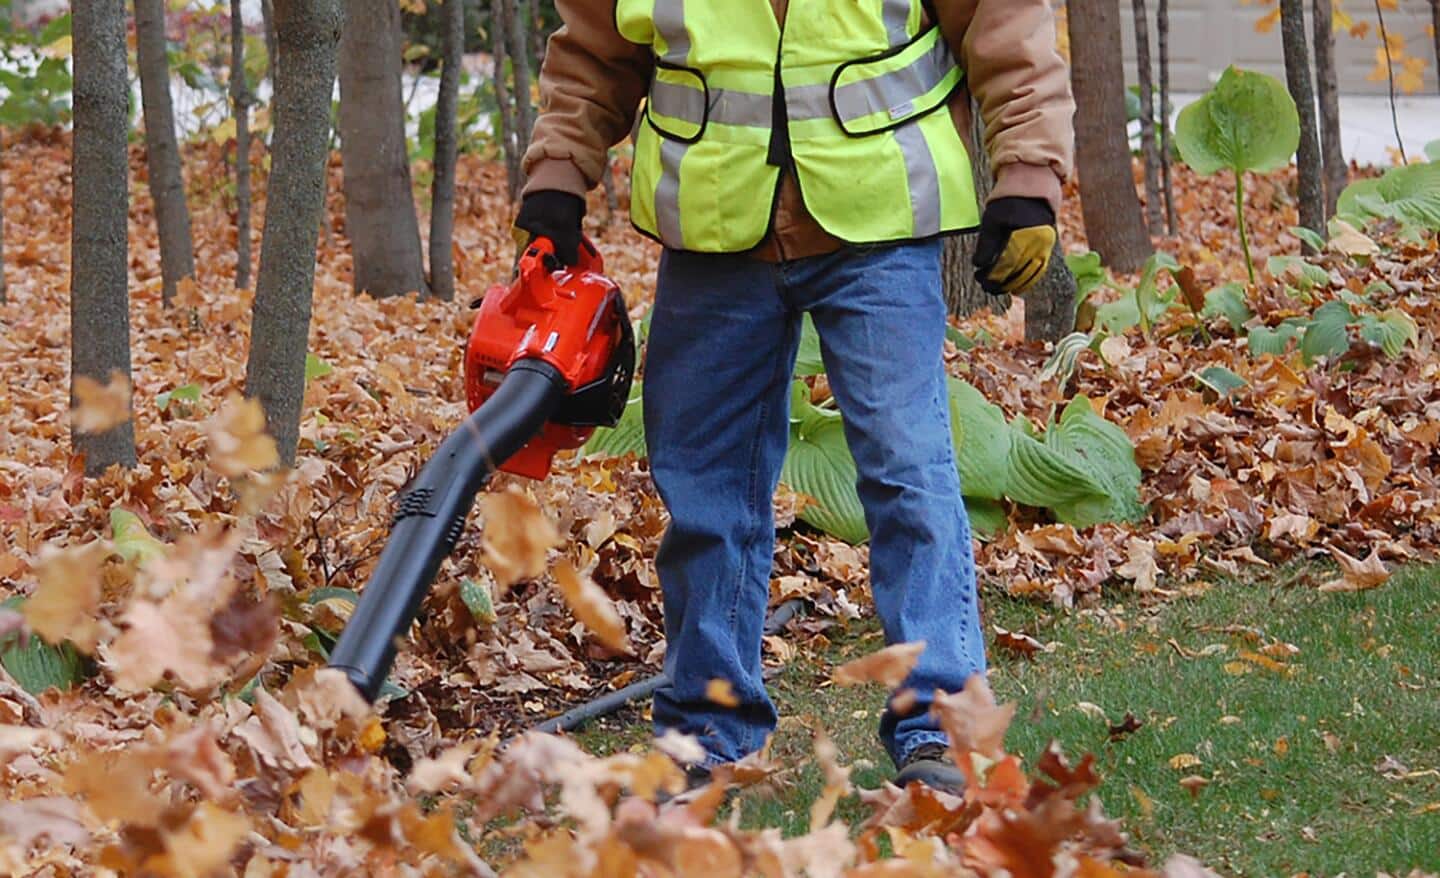 A worker uses a cordless leaf blower to blow away leaves.